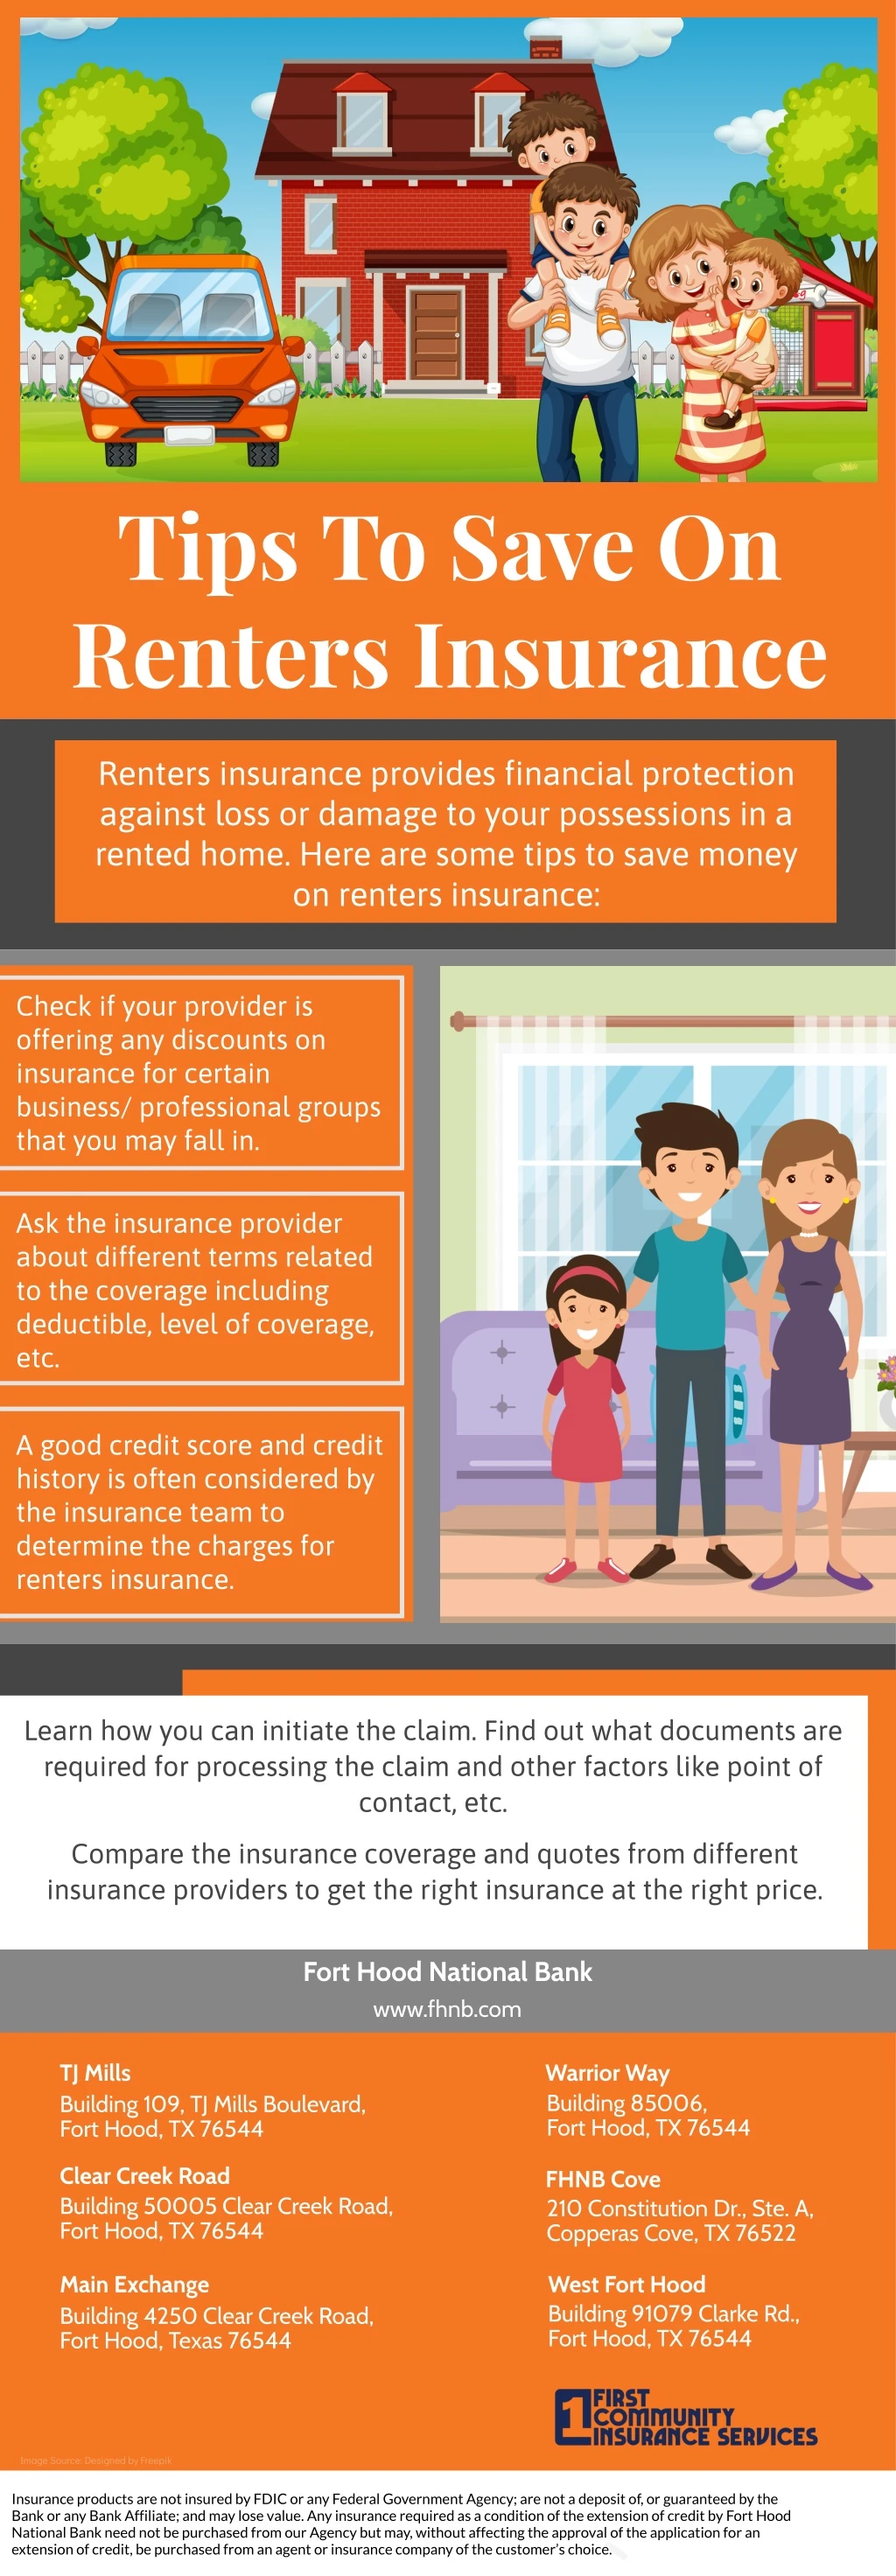 tips to save on renters insurance